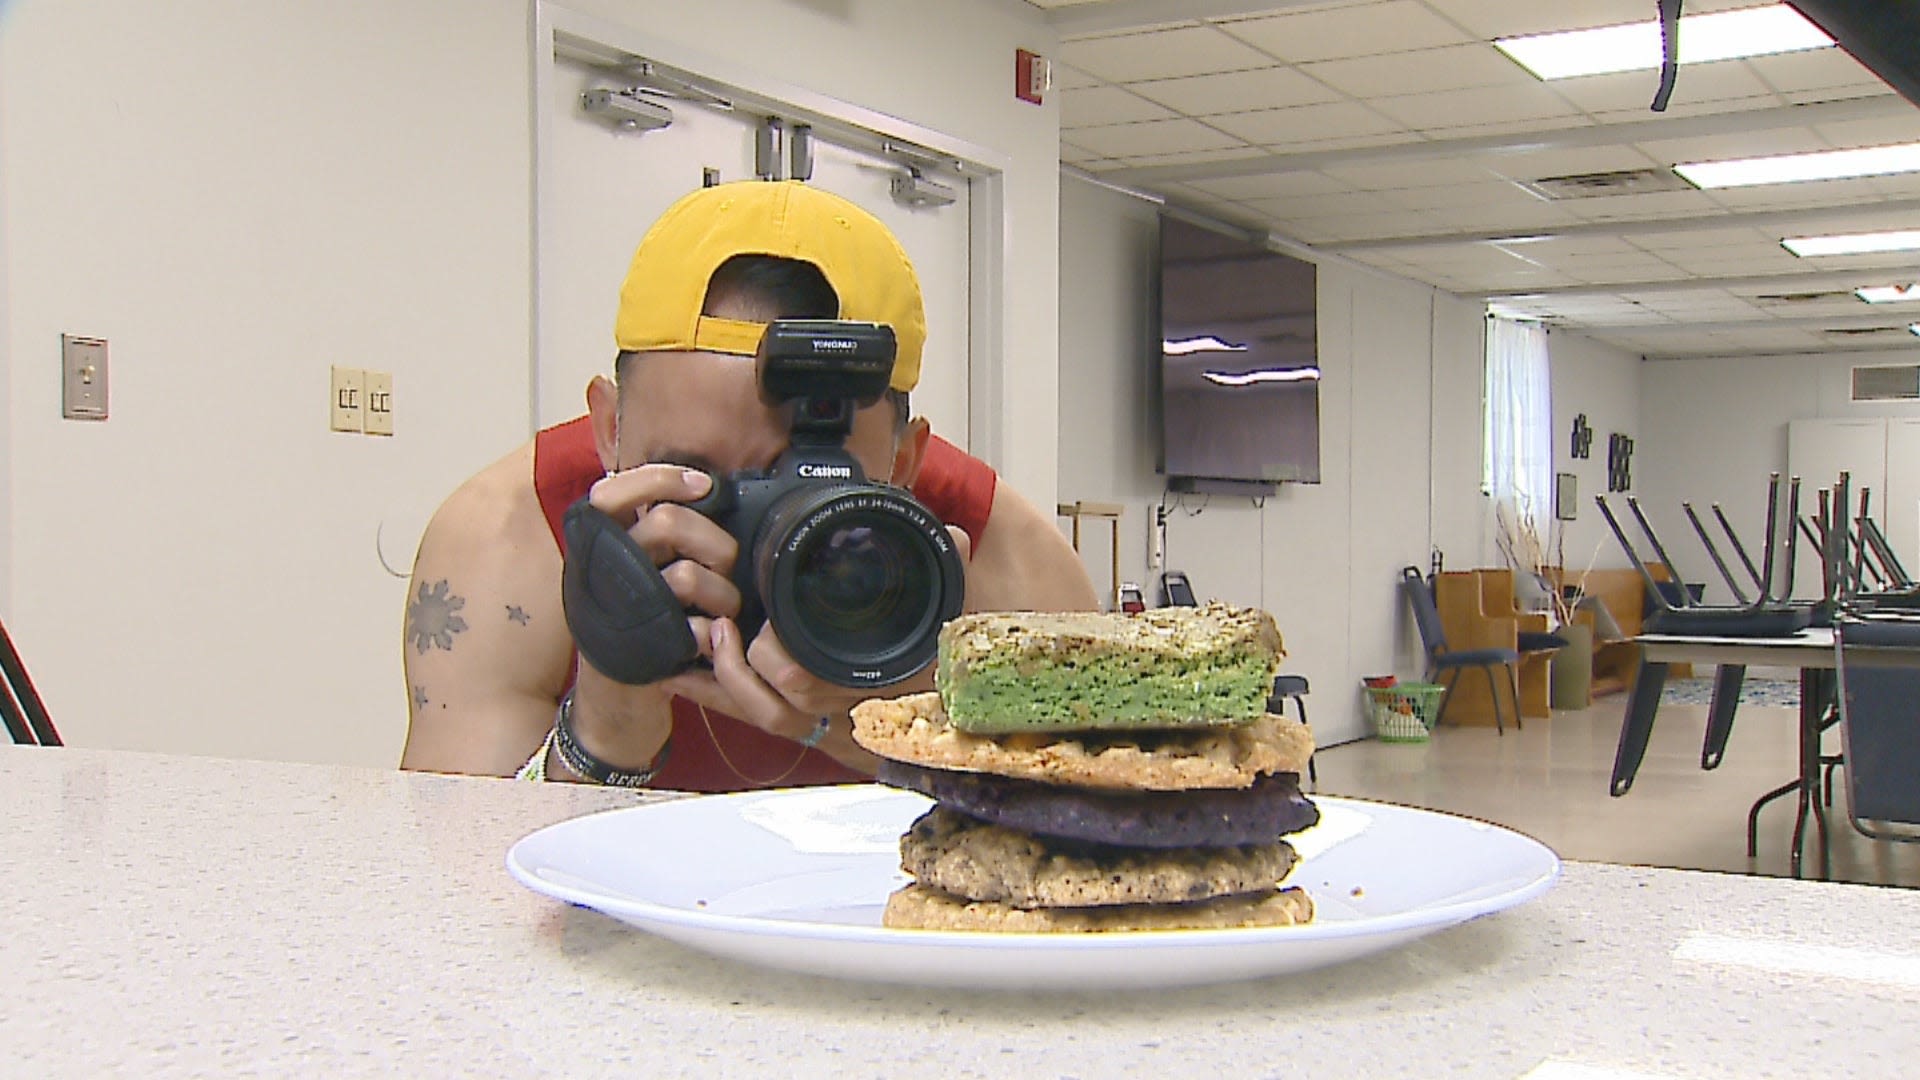 Man shares his Filipino culture through photographs and cookies